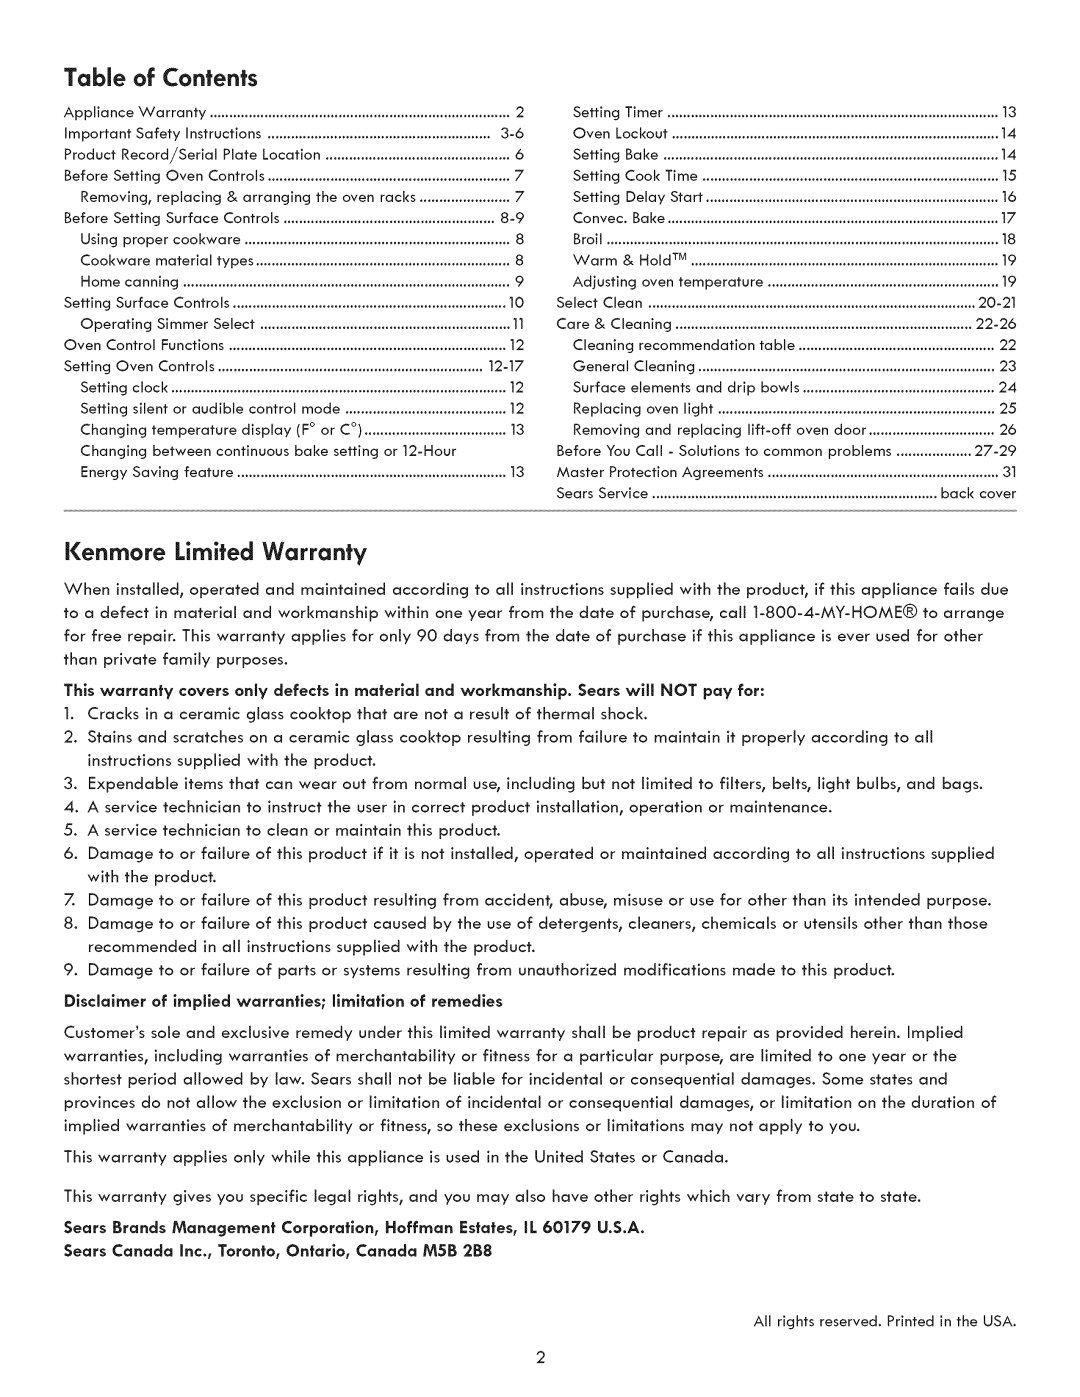 Kenmore 790.9031 manual of Contents, Kenmore, Limited Warranty 